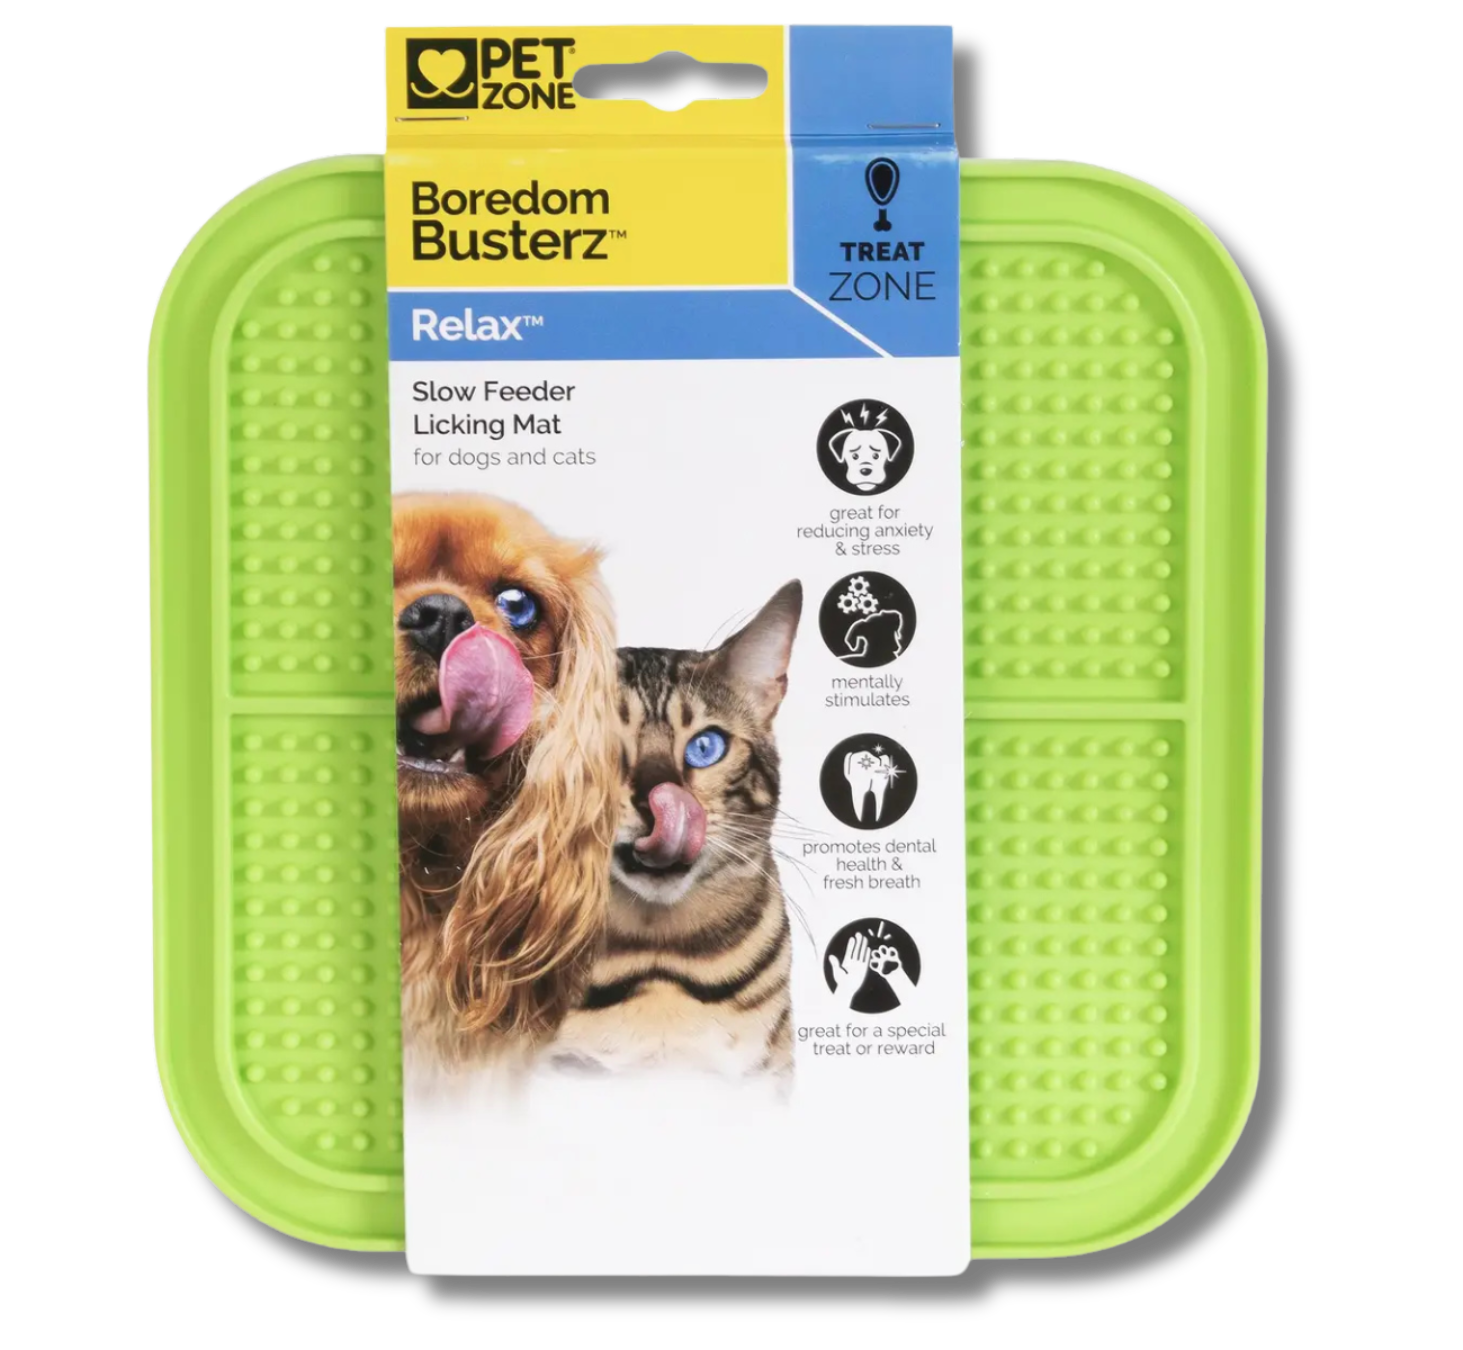 Boredom Busters – Trusted Dog Products